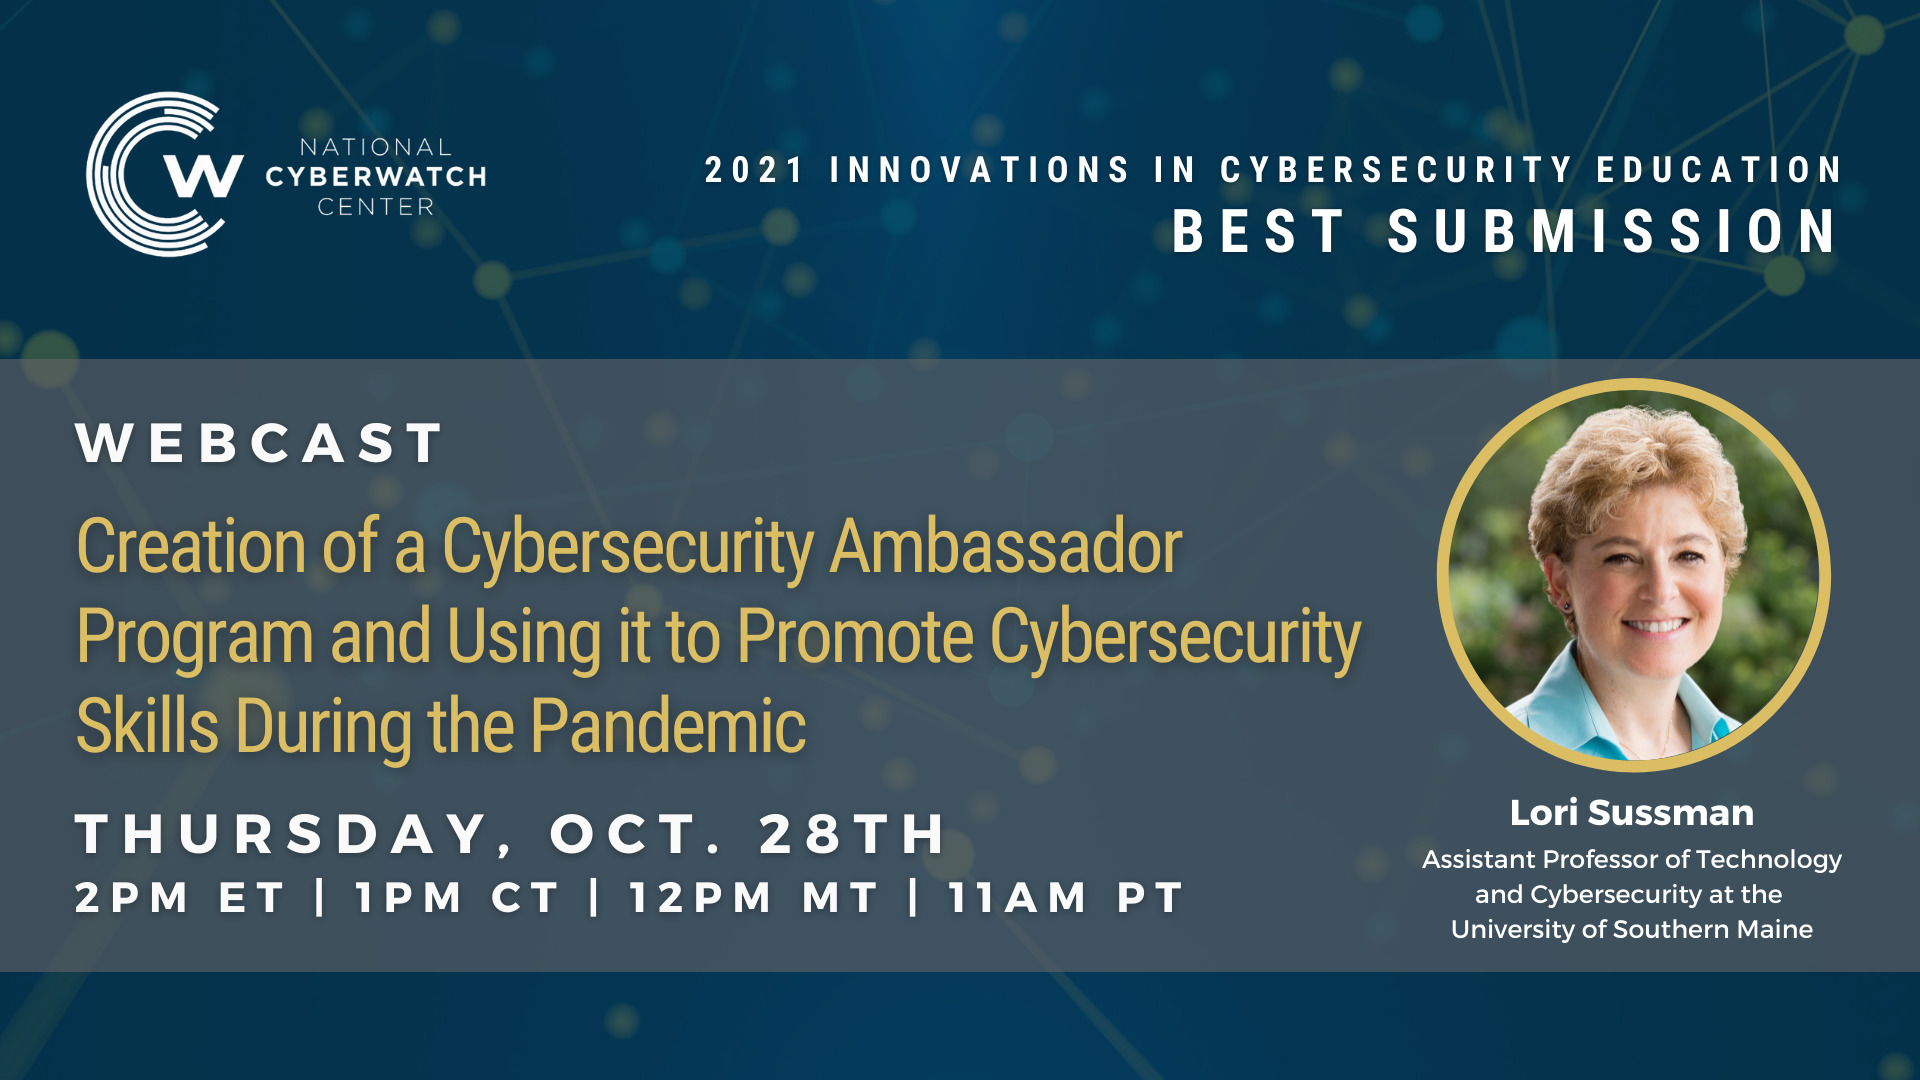 Creation of a Cybersecurity Ambassador Program and Using it to Promote Cybersecurity Skills During the Pandemic Webcast - National CyberWatch Center 10-28-21